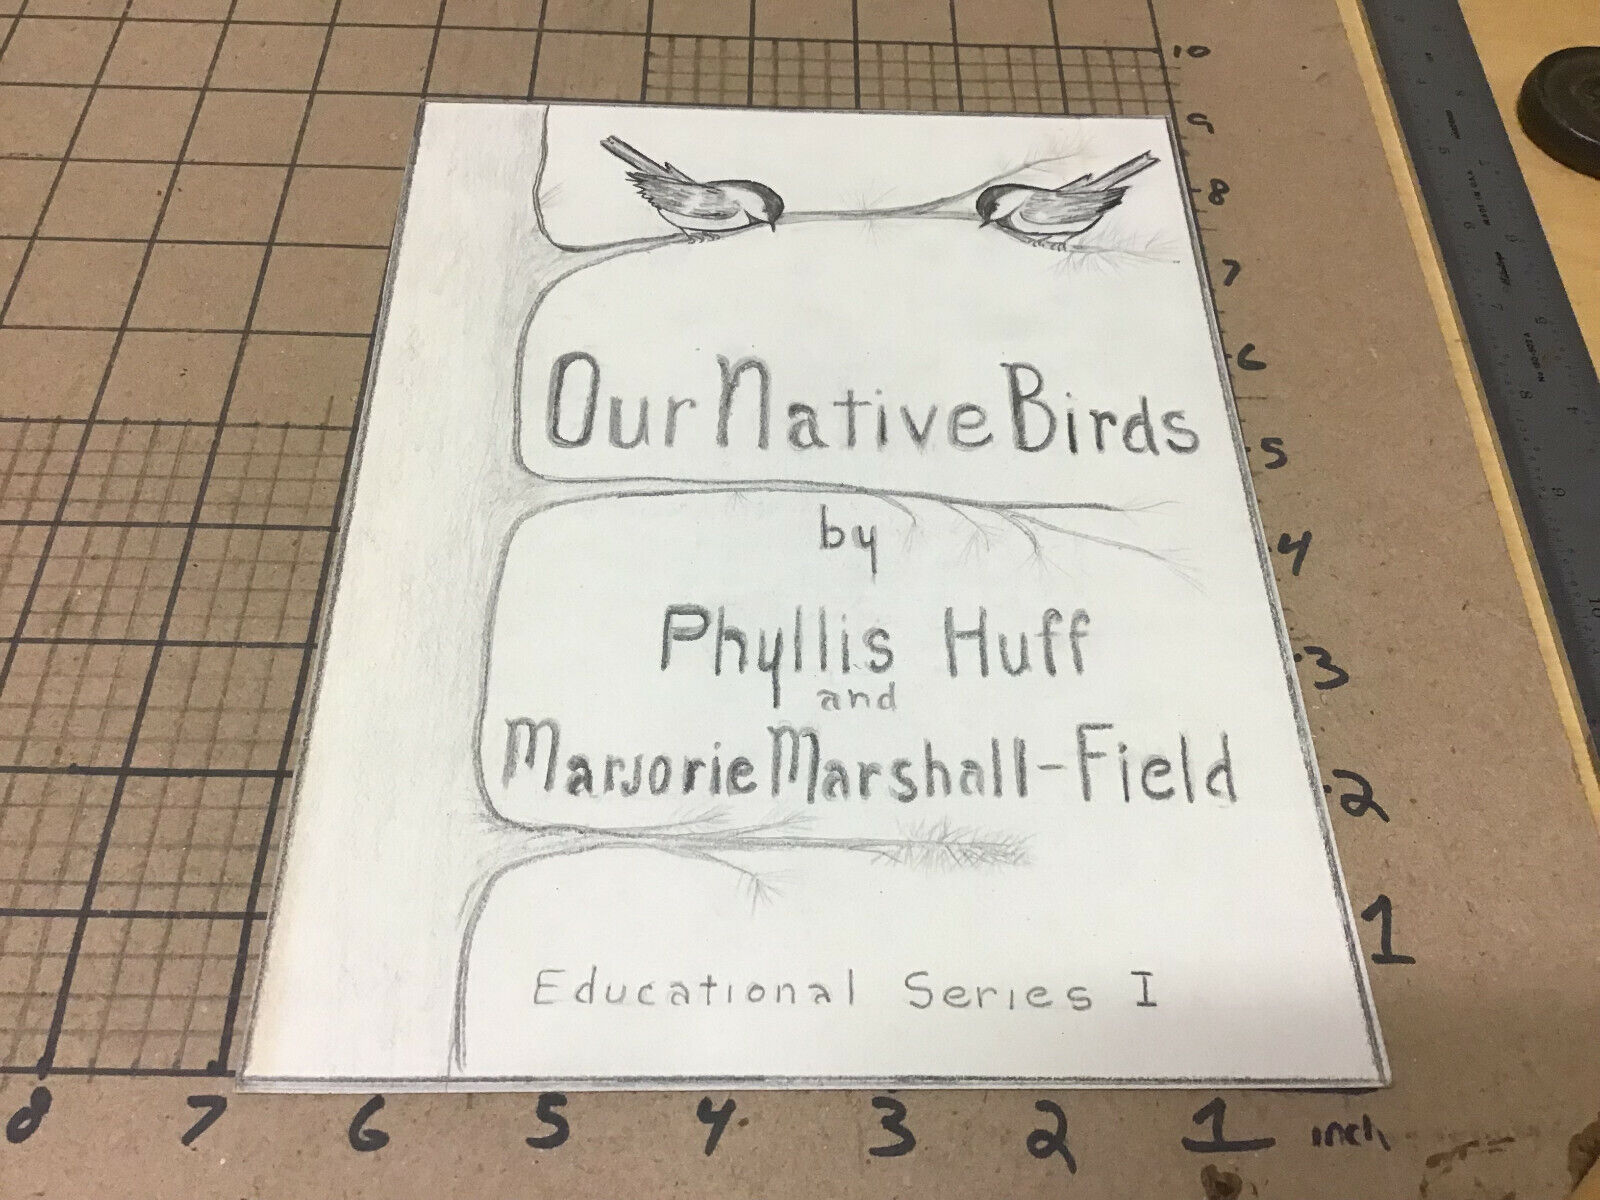 Original 1950's Art: OUR NATIVE BIRDS by Phyllis Huff ed series I (record)